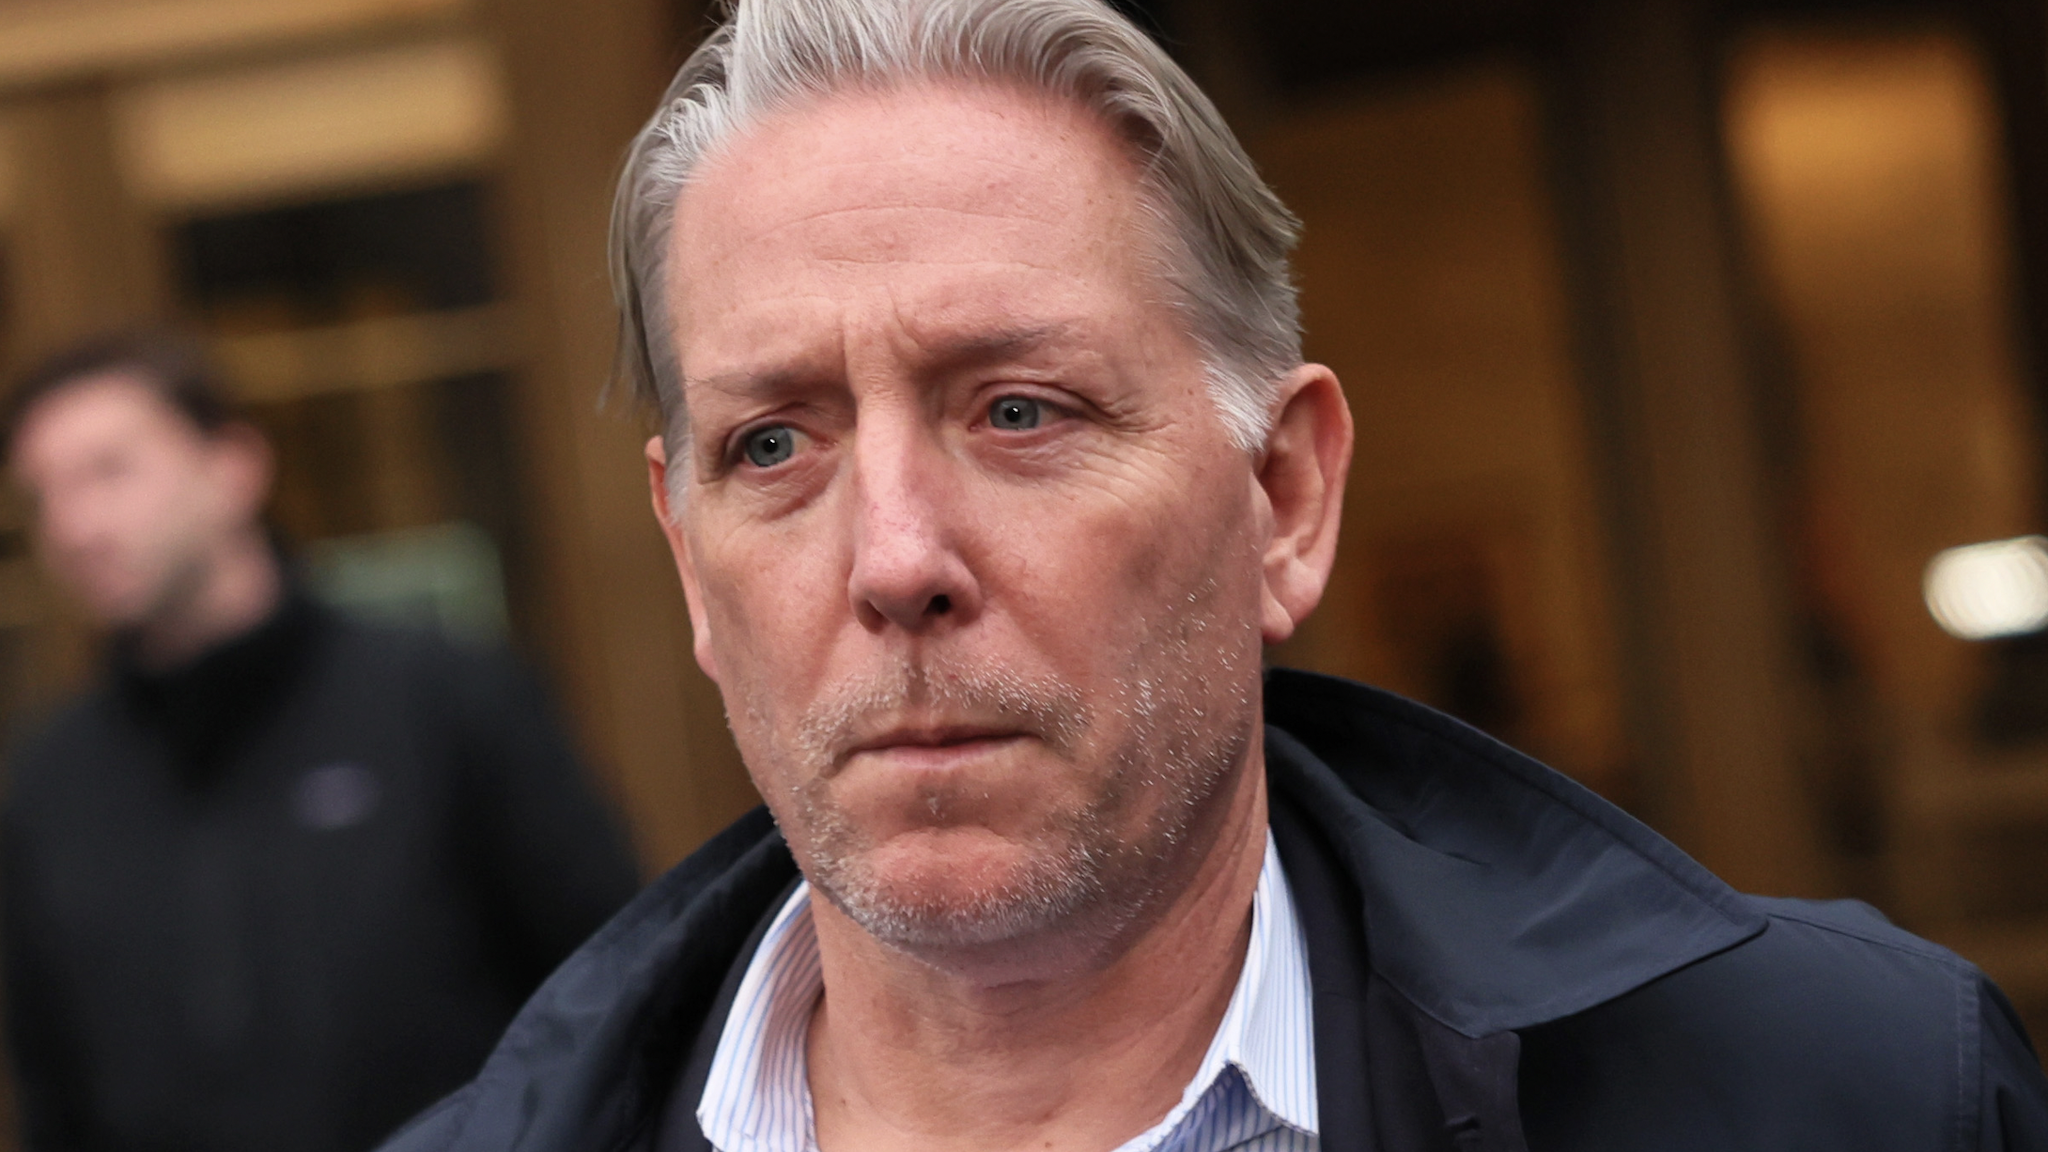 NEW YORK, NEW YORK - JANUARY 23: Charles McGonigal, the former head of counterintelligence for the FBI’s New York office, leaves Manhattan Federal Court on January 23, 2023 in New York City. McGonigal is being charged with money laundering, and conspiring to violate U.S. sanctions against Russia while secretly working with Russian oligarch Oleg Deripaska. Sergey Shestakov, a former Soviet and Russian diplomat, has also been charged in the case.